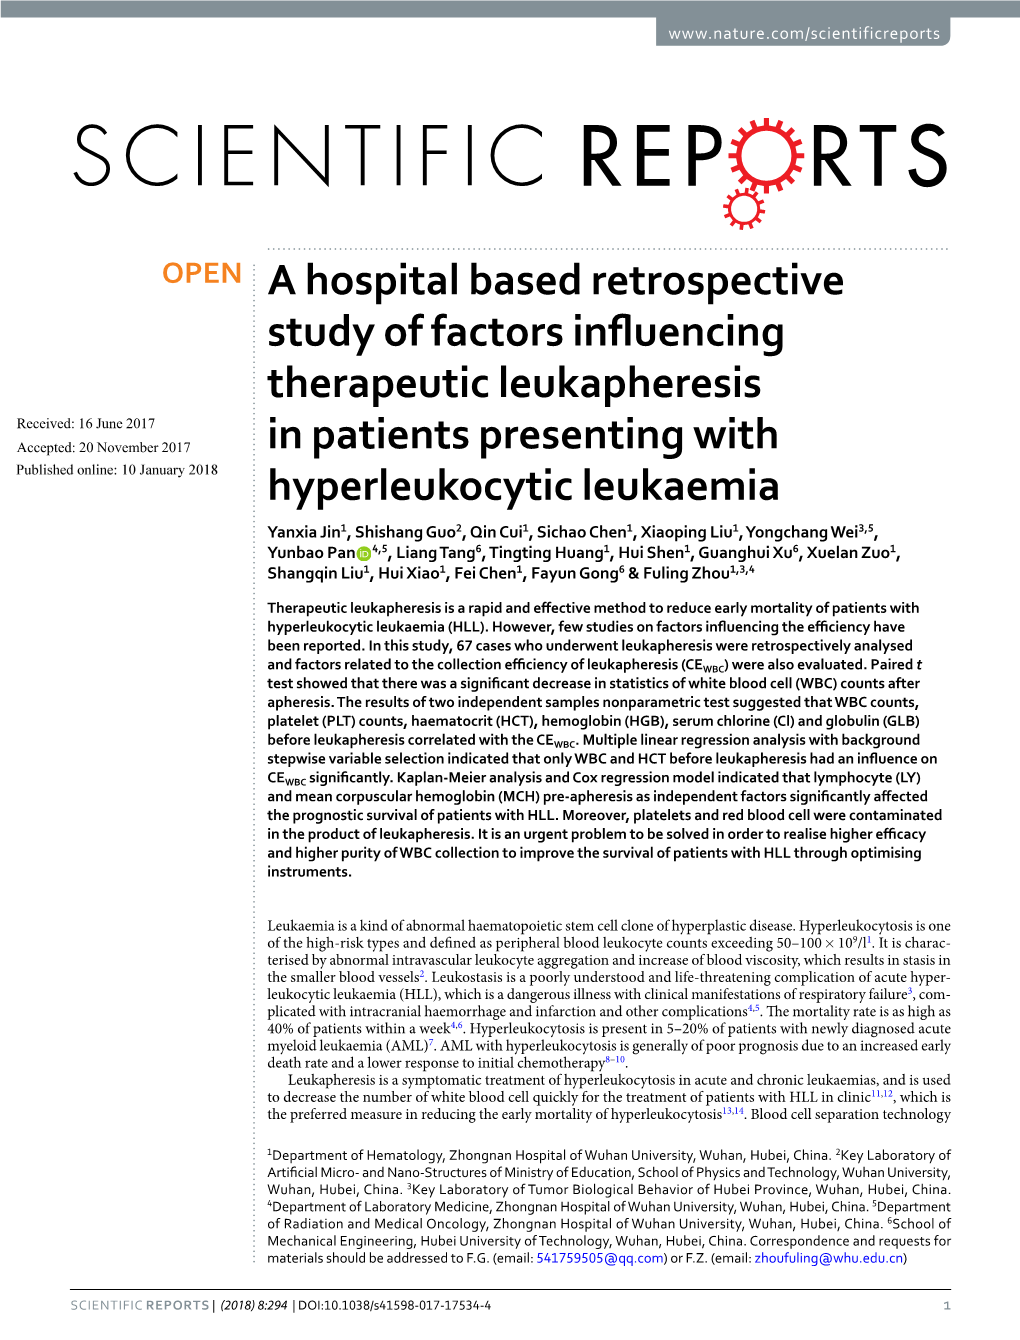 A Hospital Based Retrospective Study of Factors Influencing Therapeutic Leukapheresis in Patients Presenting with Hyperleukocyti